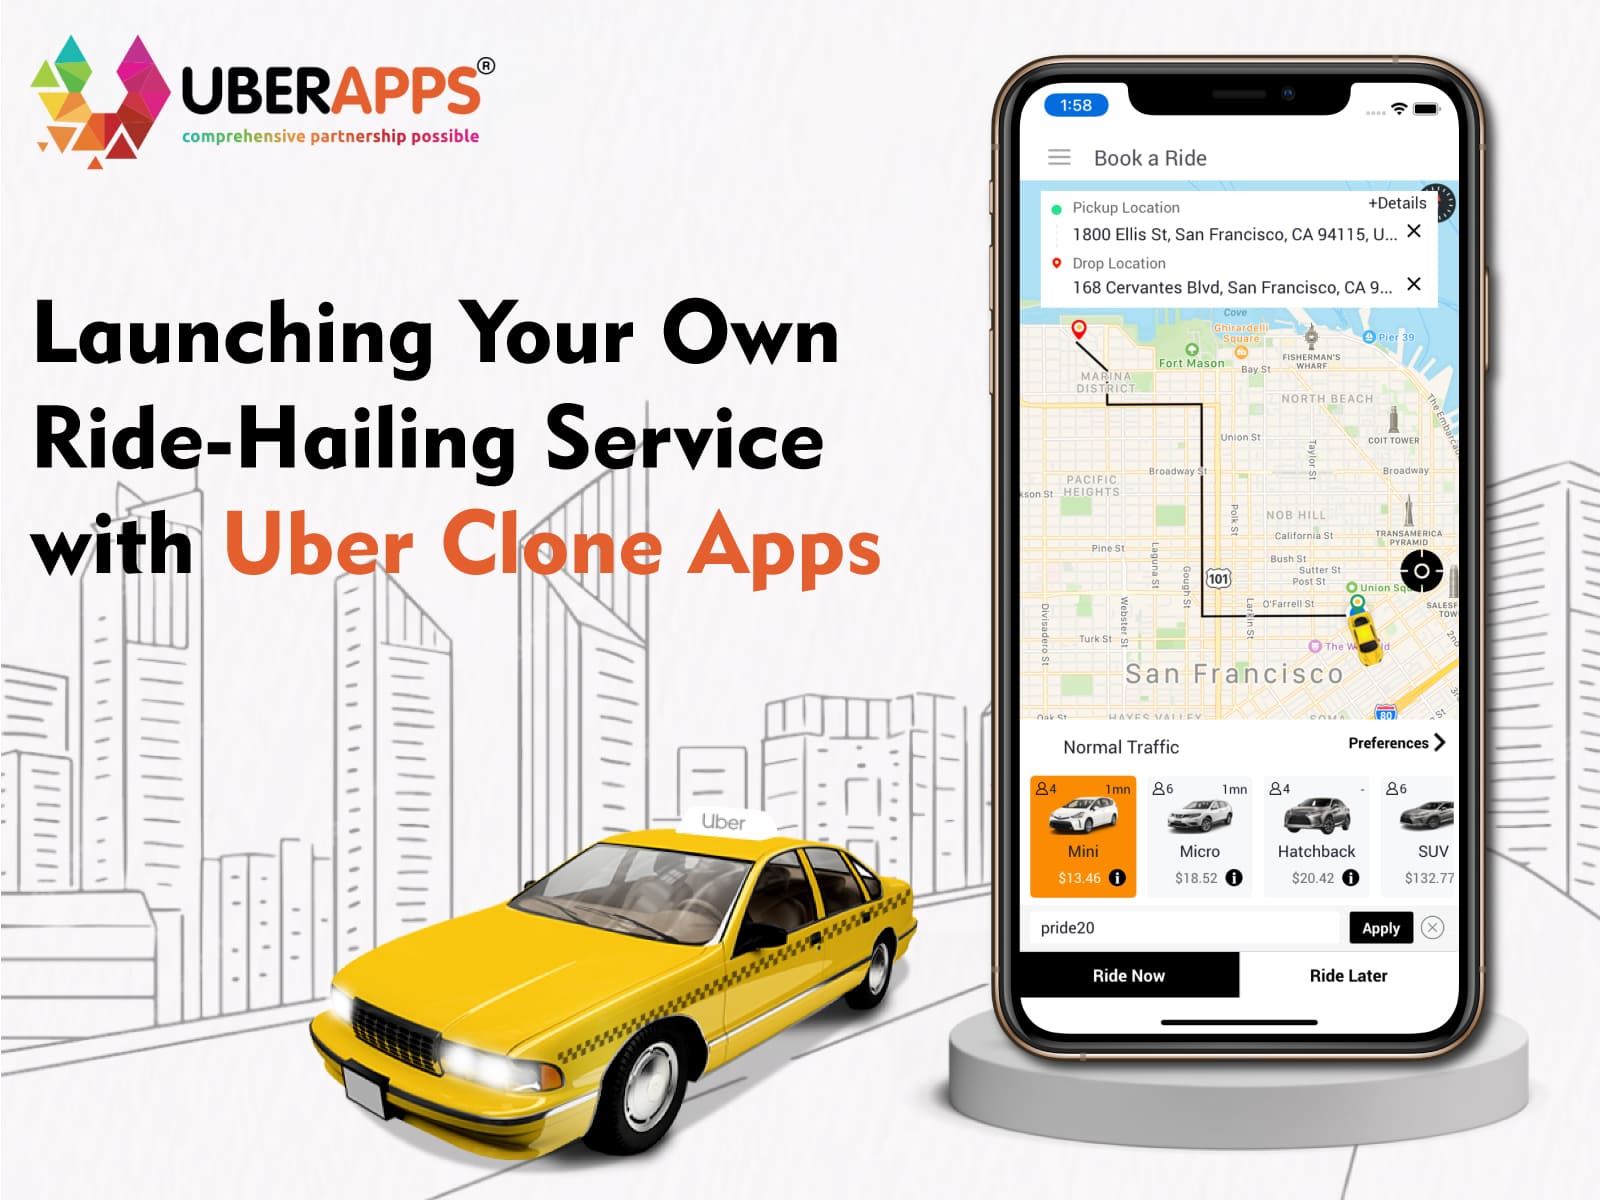 Launching Your Own Ride-Hailing Service with Uber Clone Apps